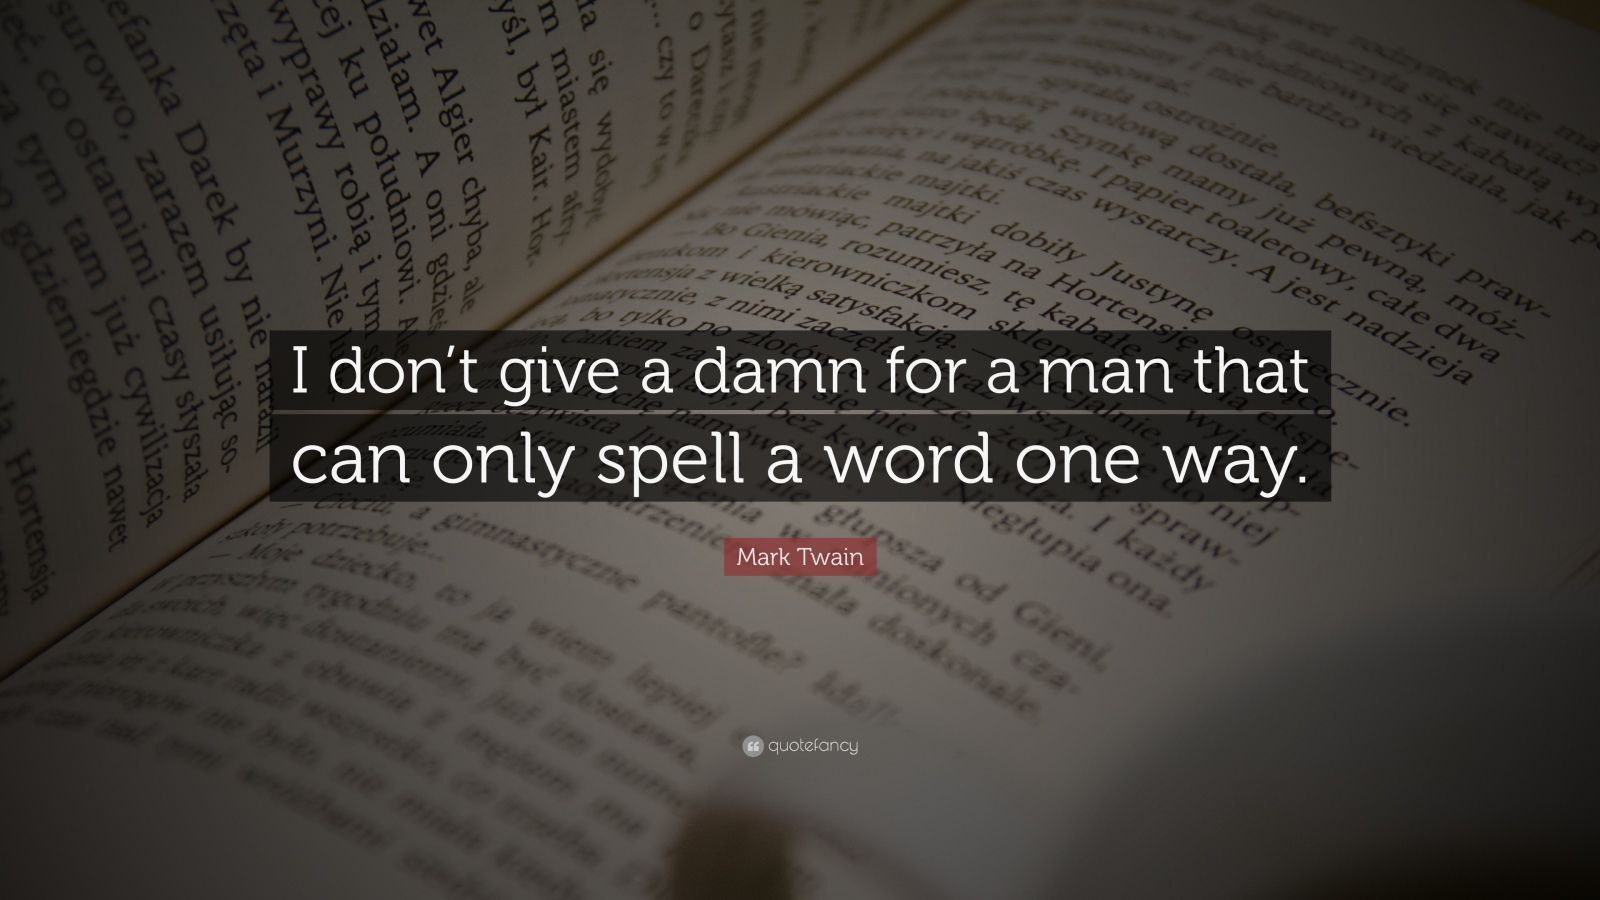 Mark Twain Quote: “I don't give a damn for a man that can only spell a word one way.” (9 wallpaper)